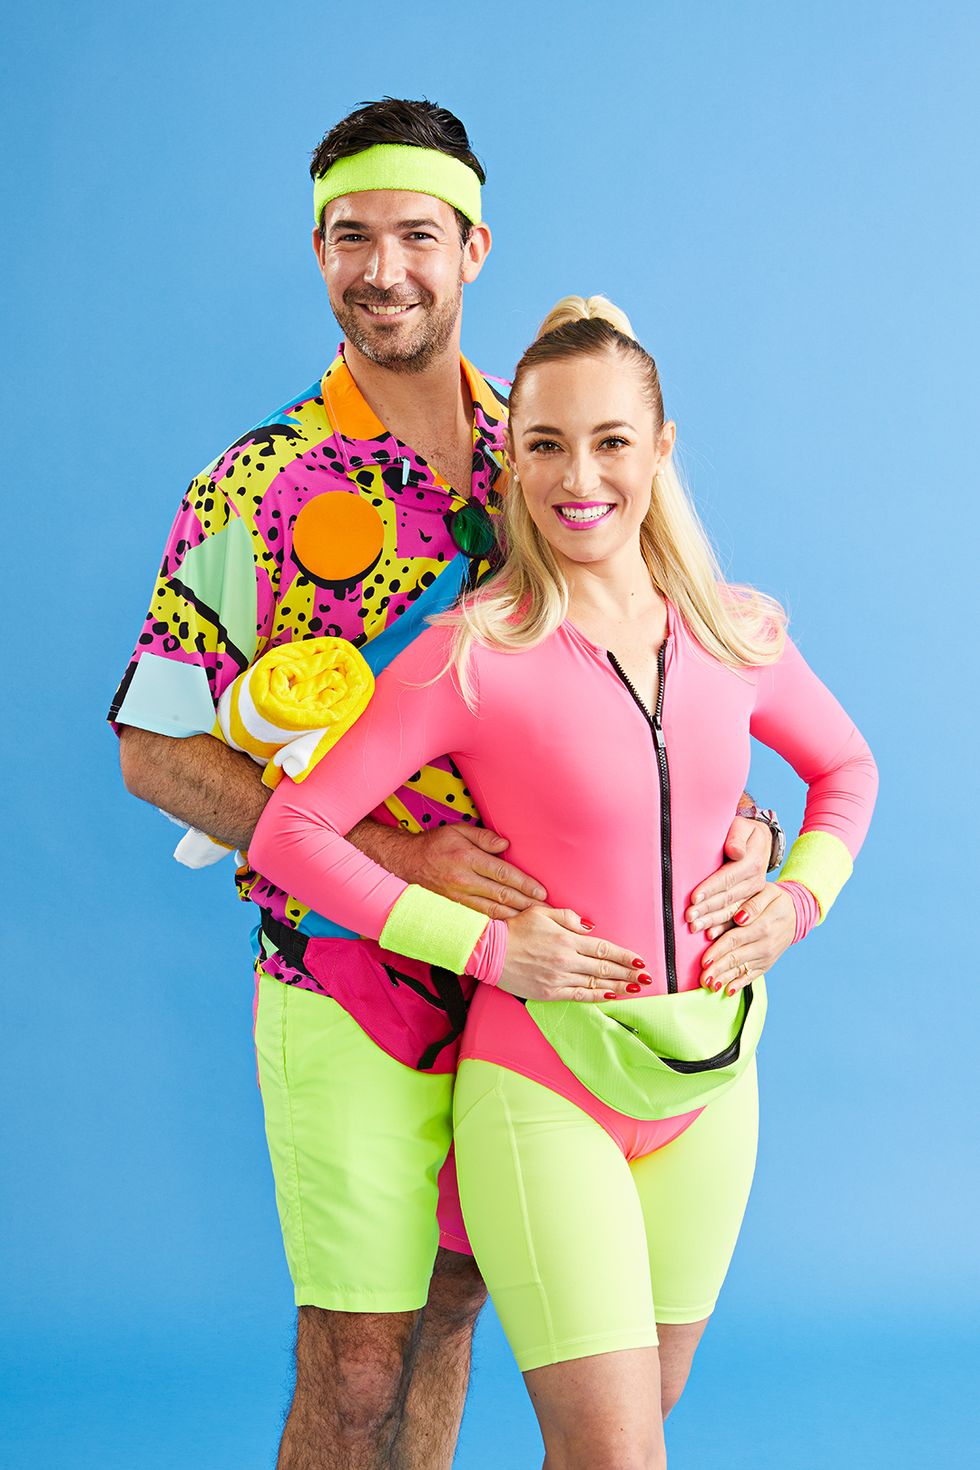 easy halloween costume, man and woman next to each other wearing colorful pink and green workout attire